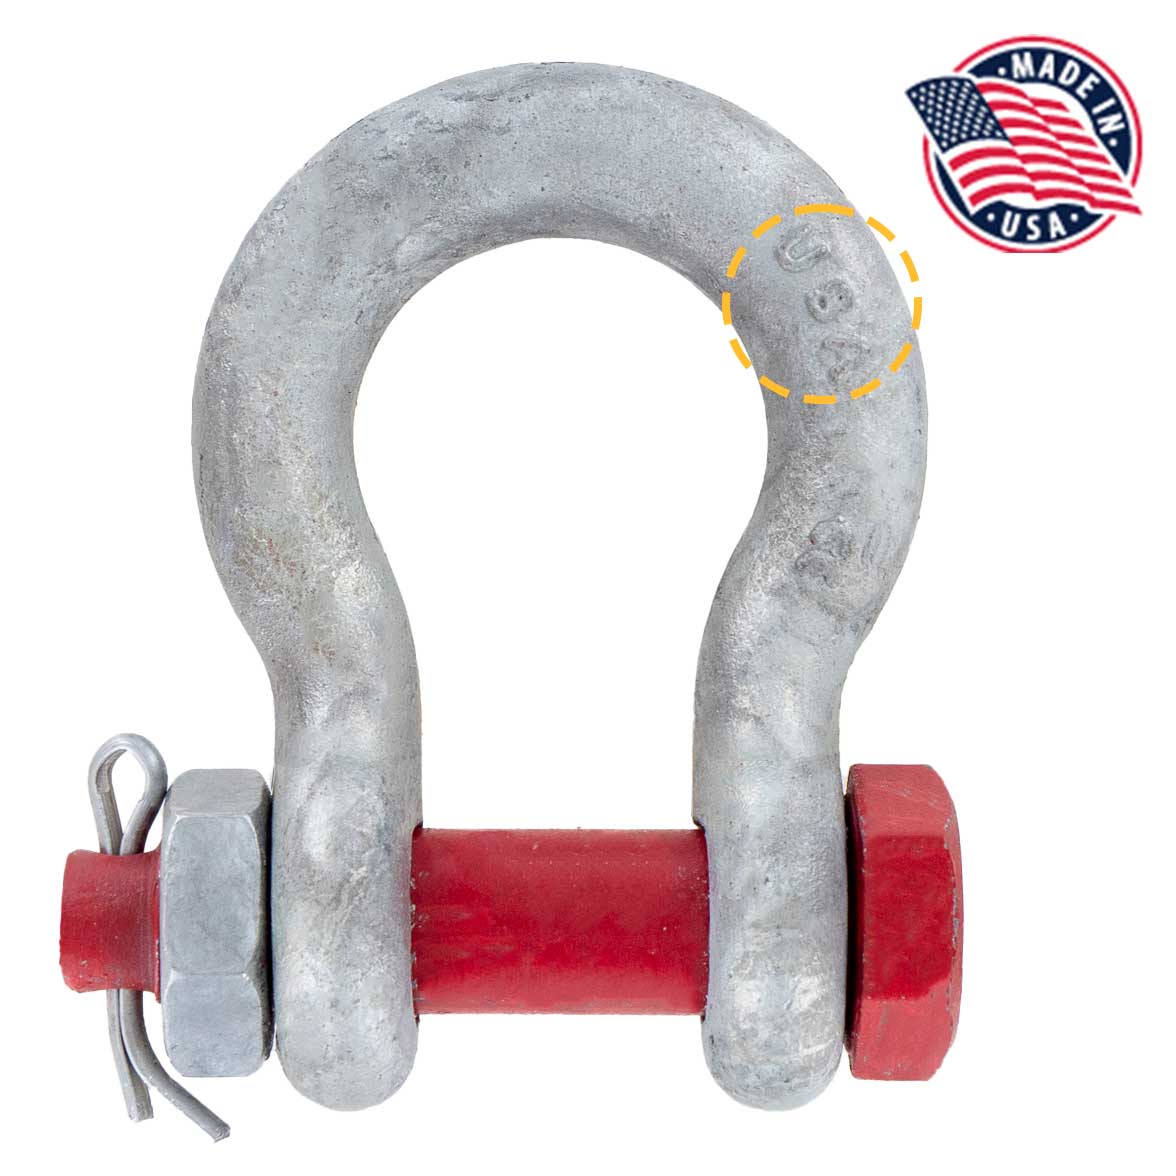 5/16" Crosby® Bolt Type Anchor Shackle | G-2130 - 0.75 Ton made in USA